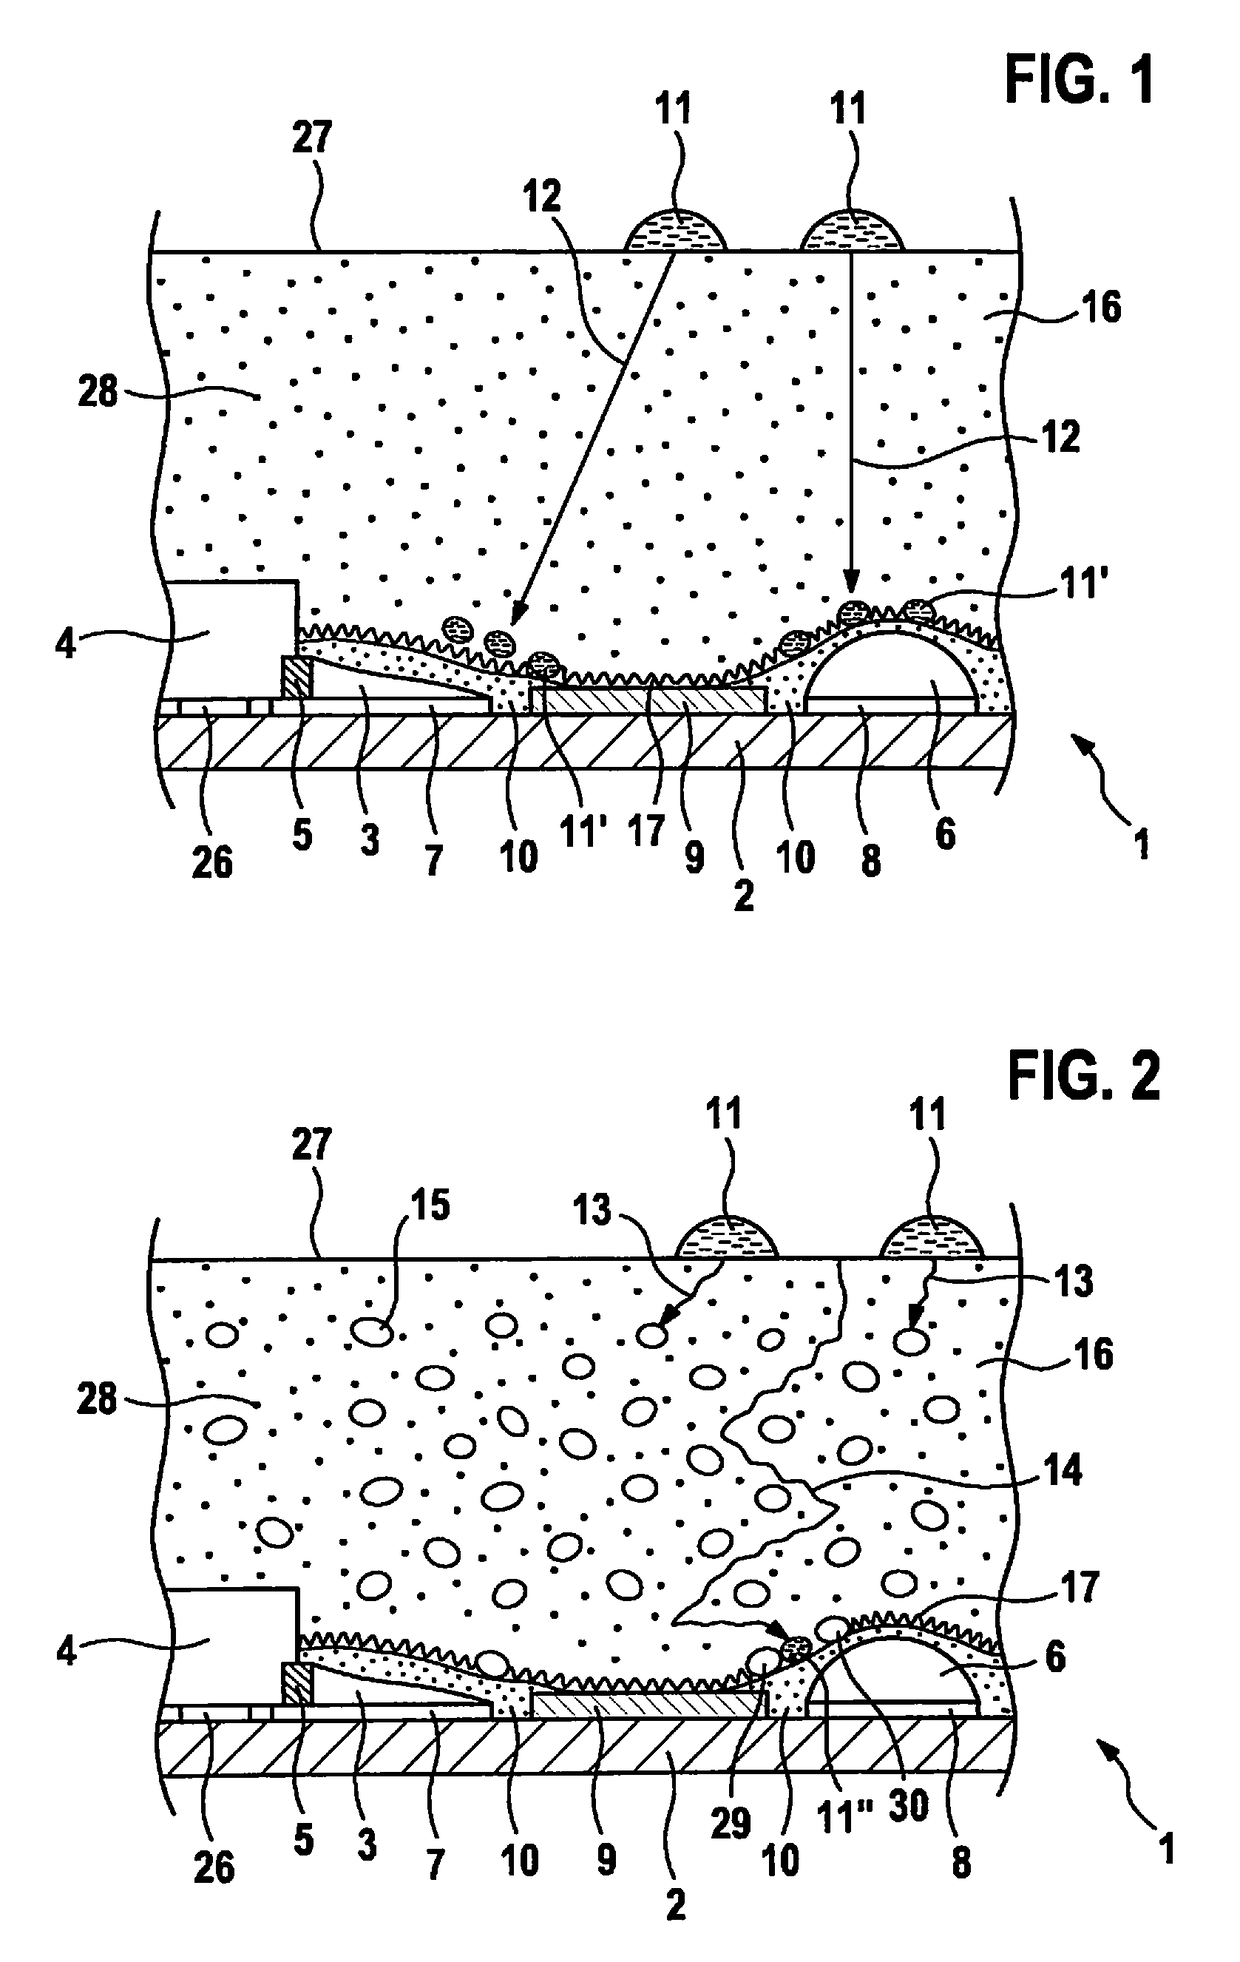 Circuit carrier including a silicone polymer coating